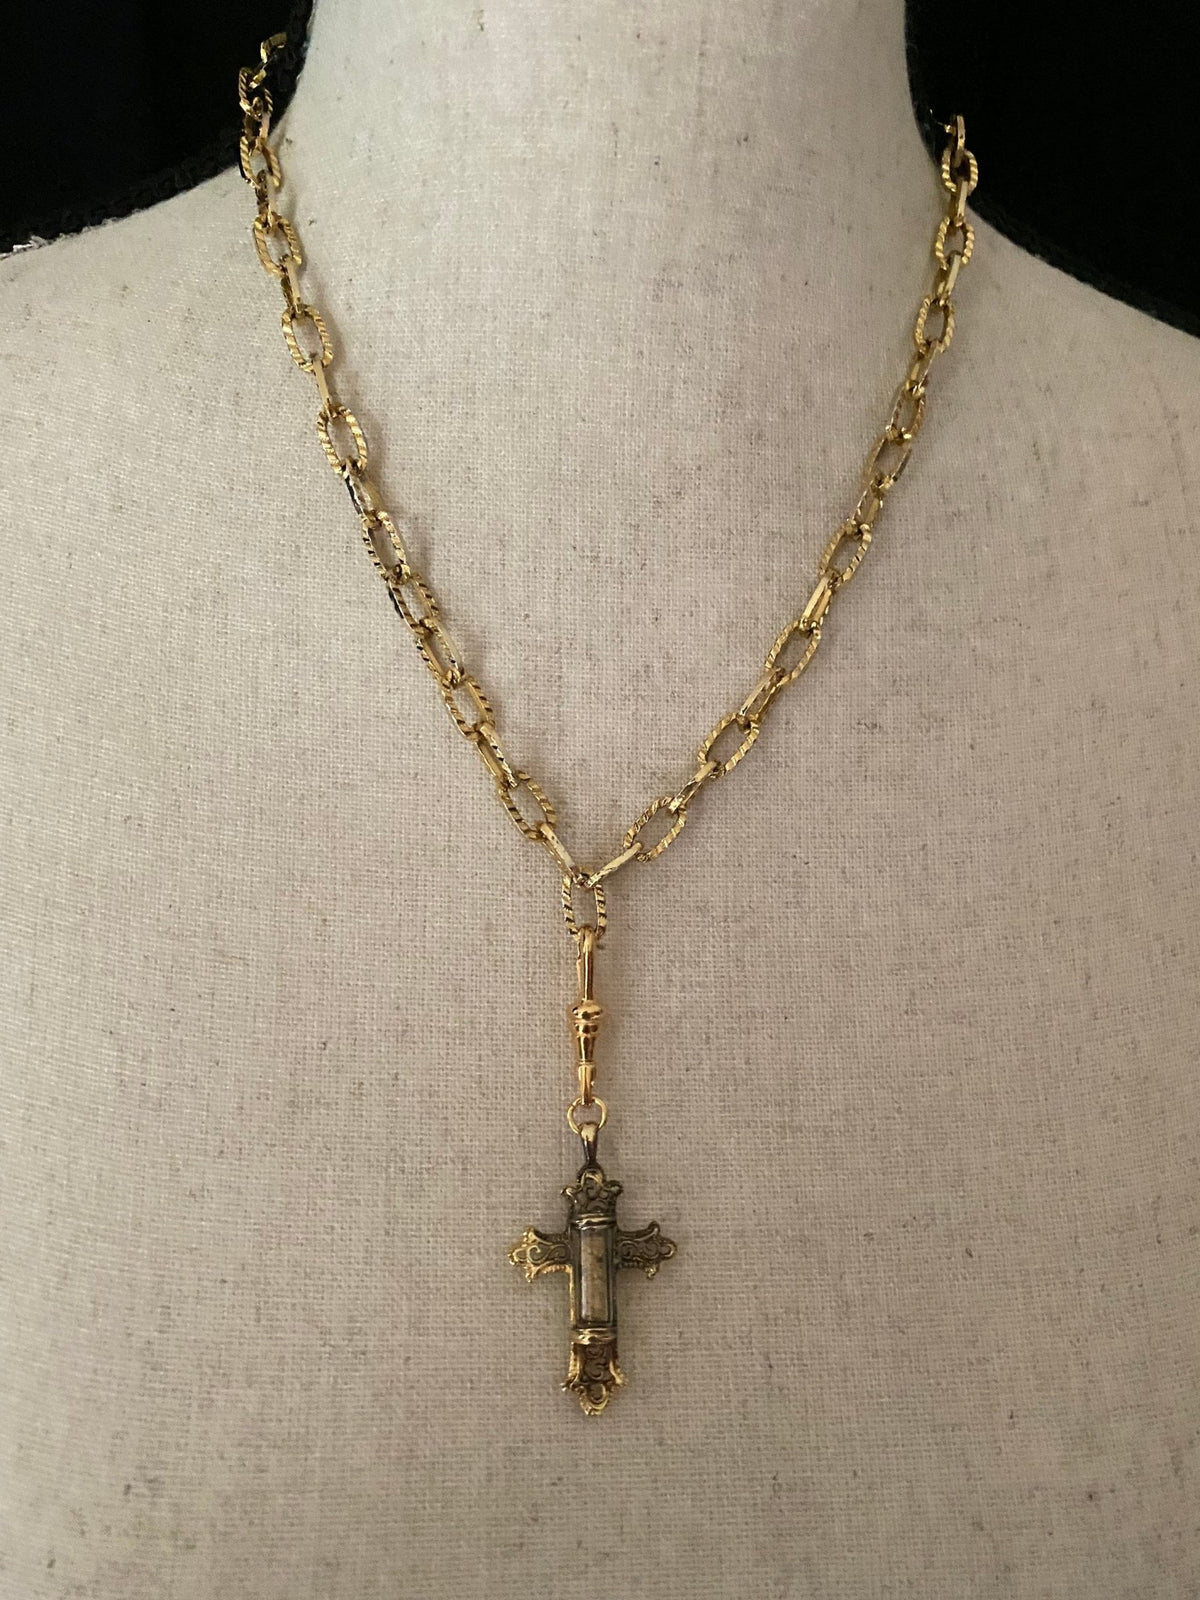 Gold Filigree Style Cross Charm - 24 Wishes Vintage Jewelry